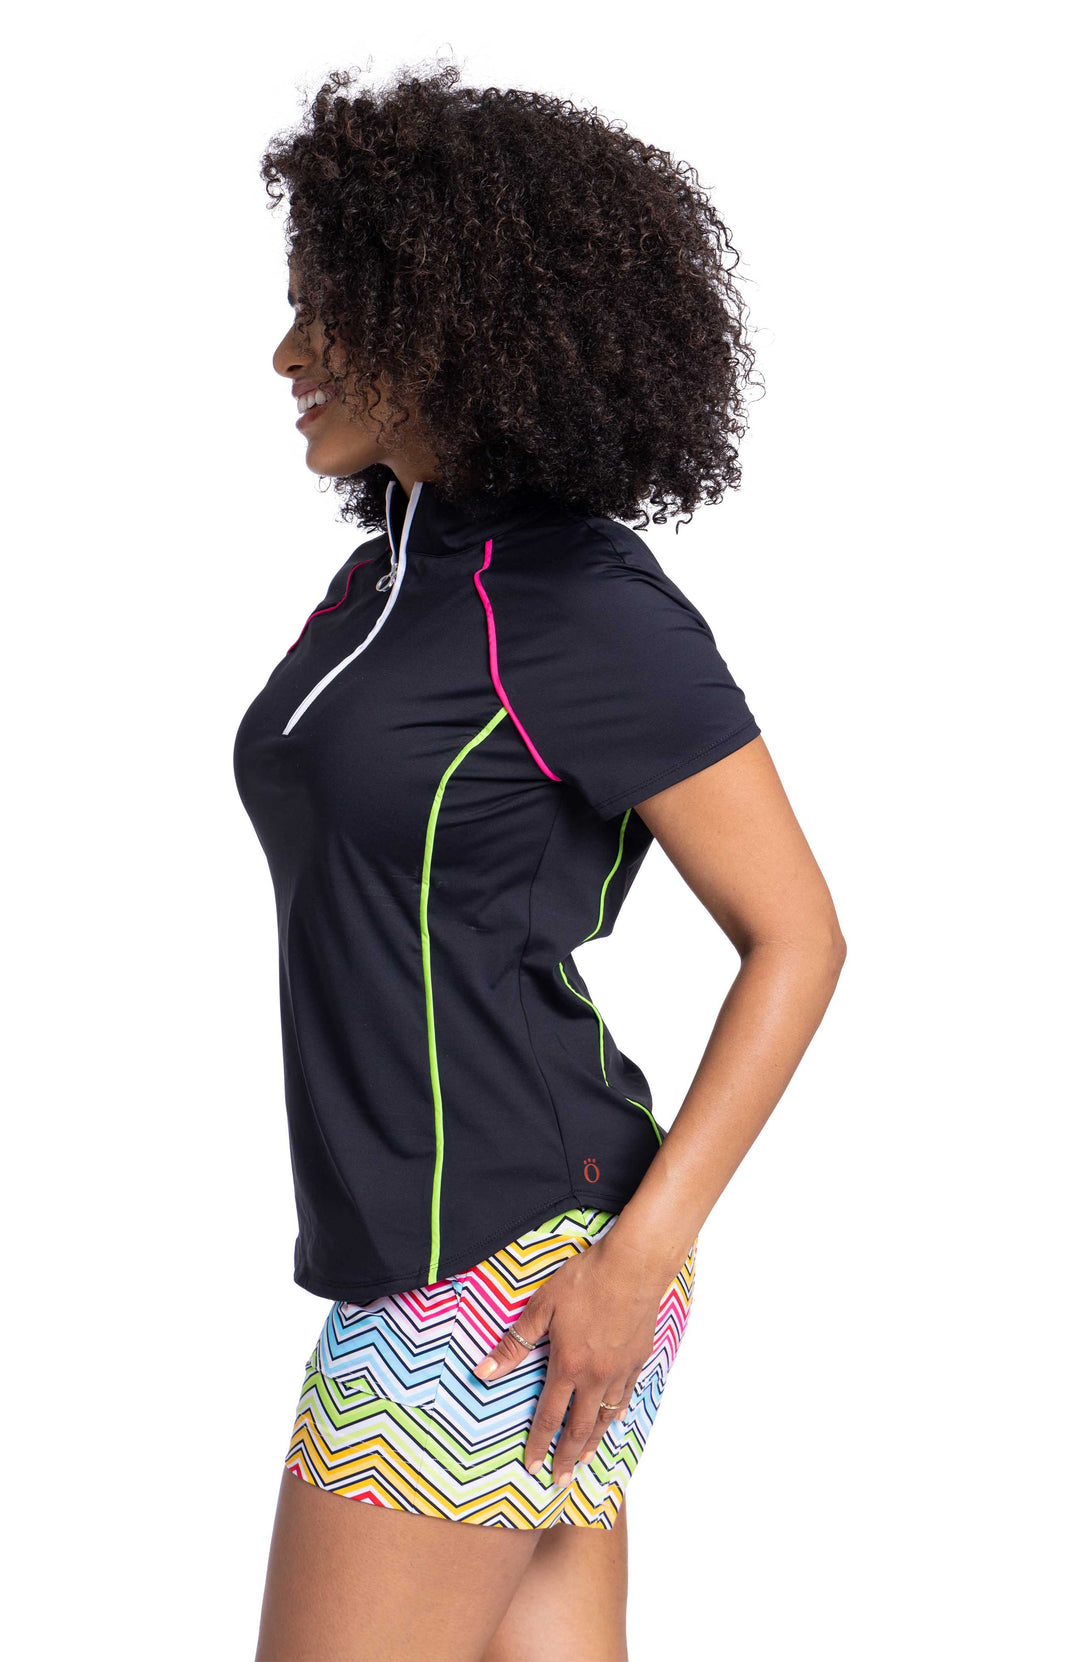 Woman's black golf shirt with pink and yellow piping and multicolored shorts